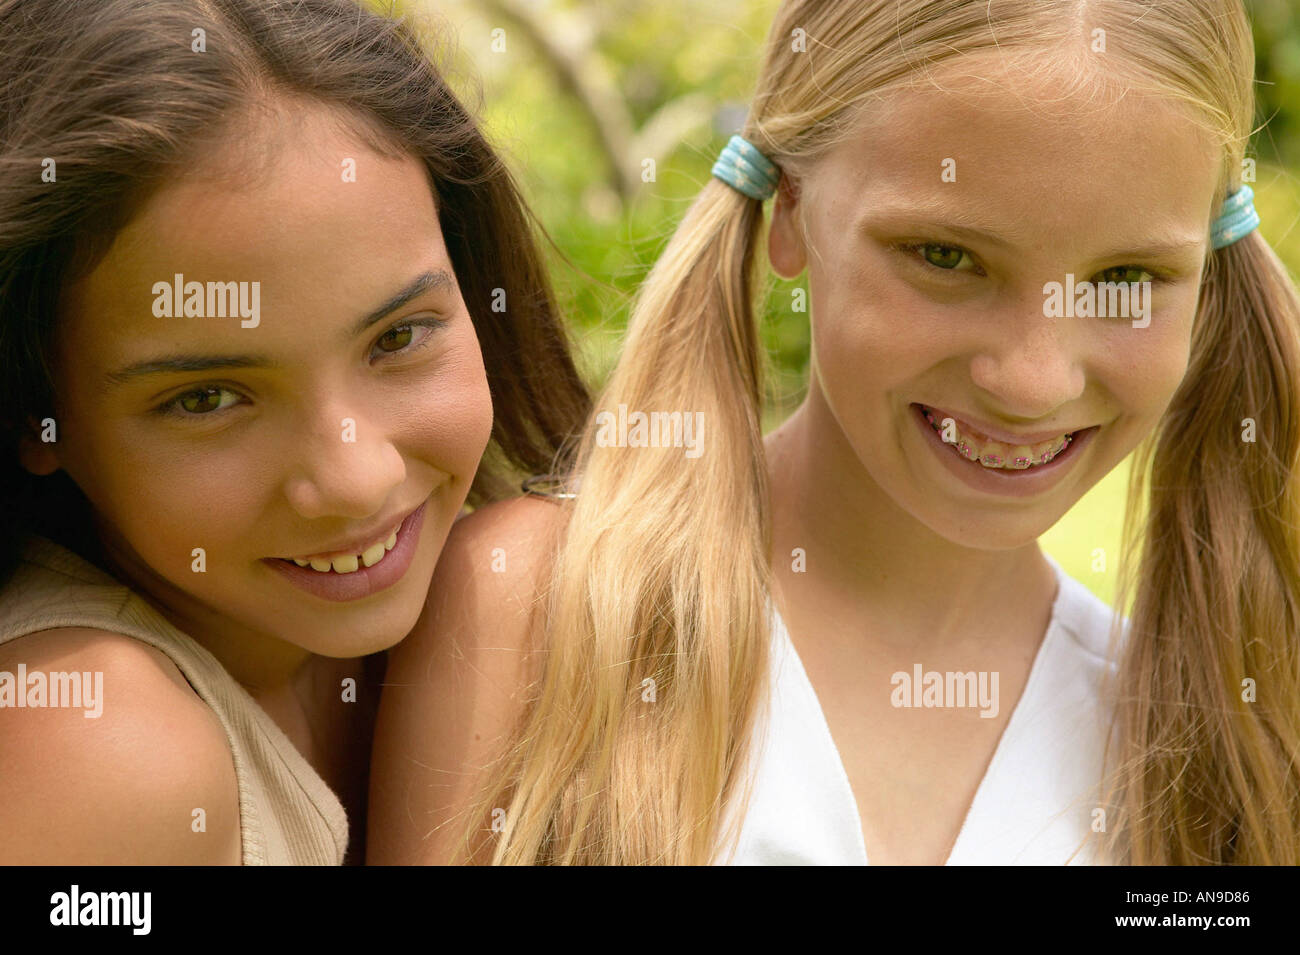 Two smiling young girls Stock Photo